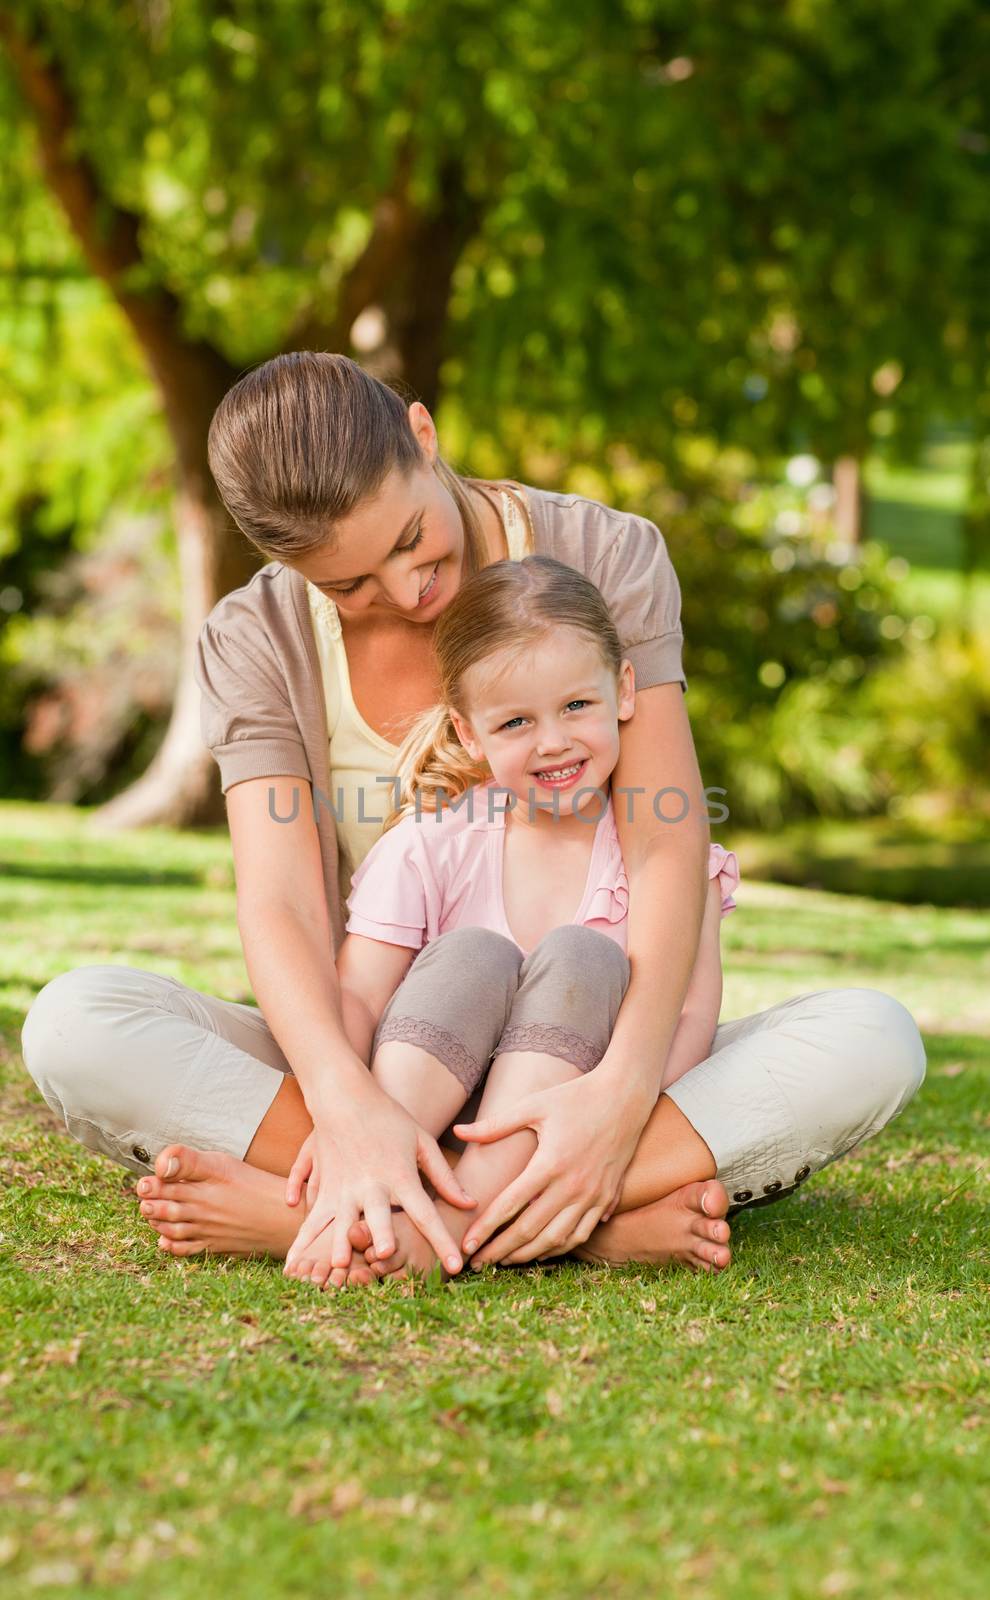 Daughter with her mother in the park by Wavebreakmedia